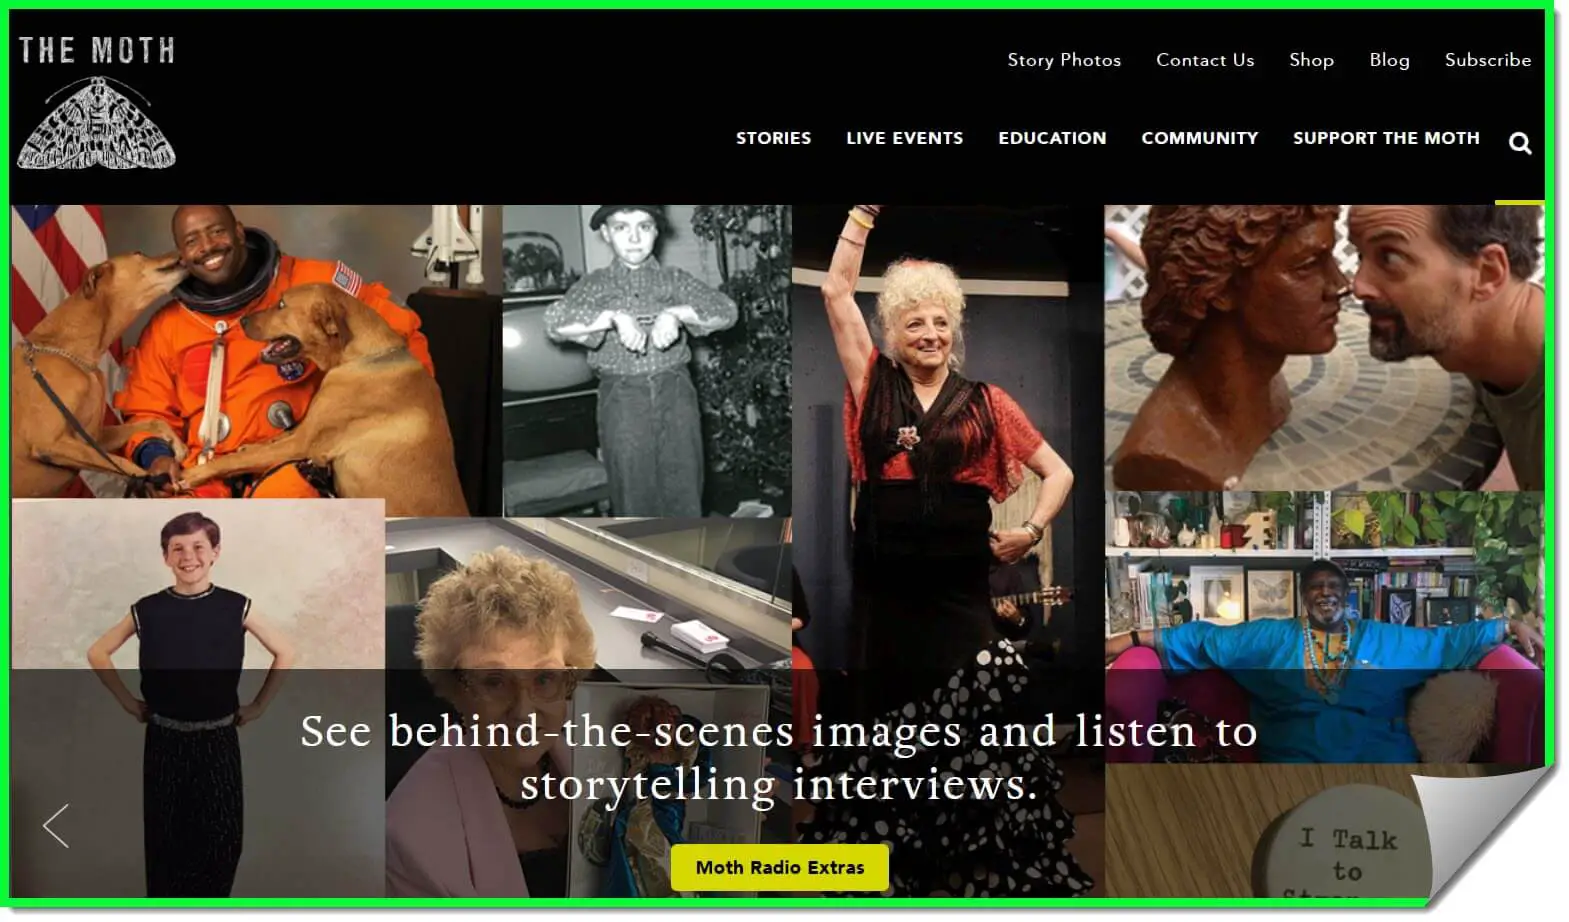 79 Amazing Cool Websites You Didn’t Know Existed